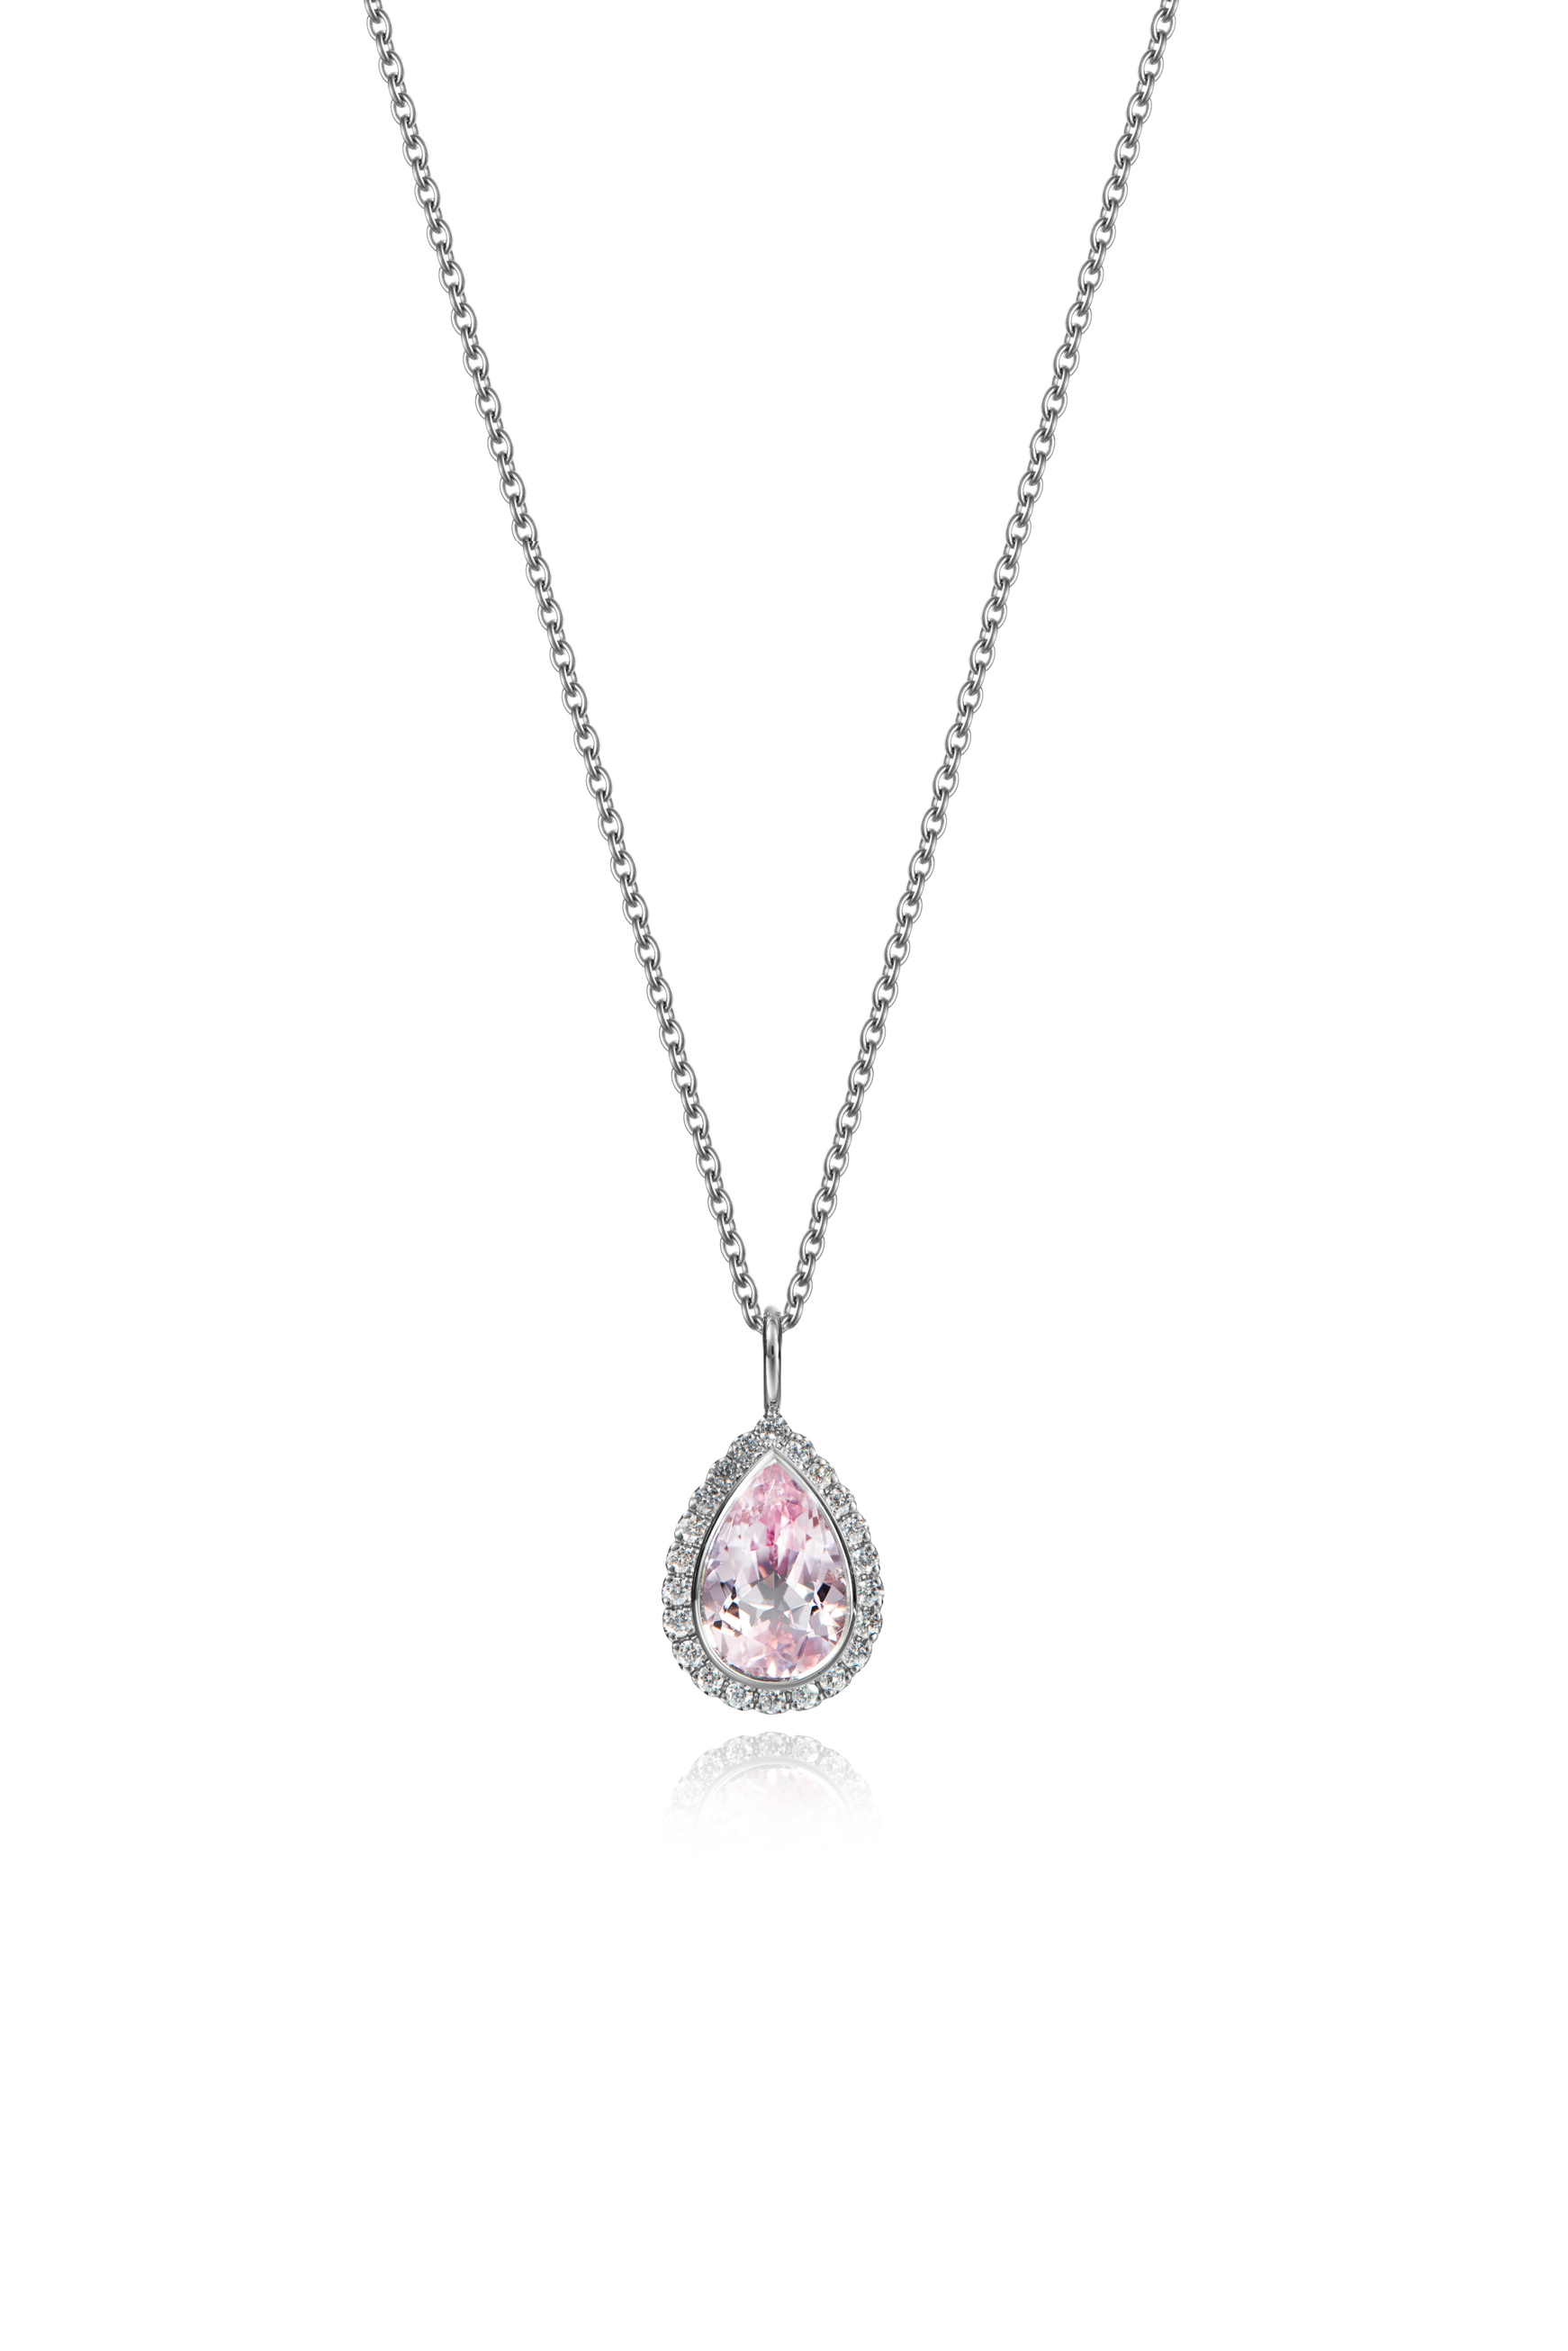 This beautiful pendant in white gold has a pink morganite in the middle